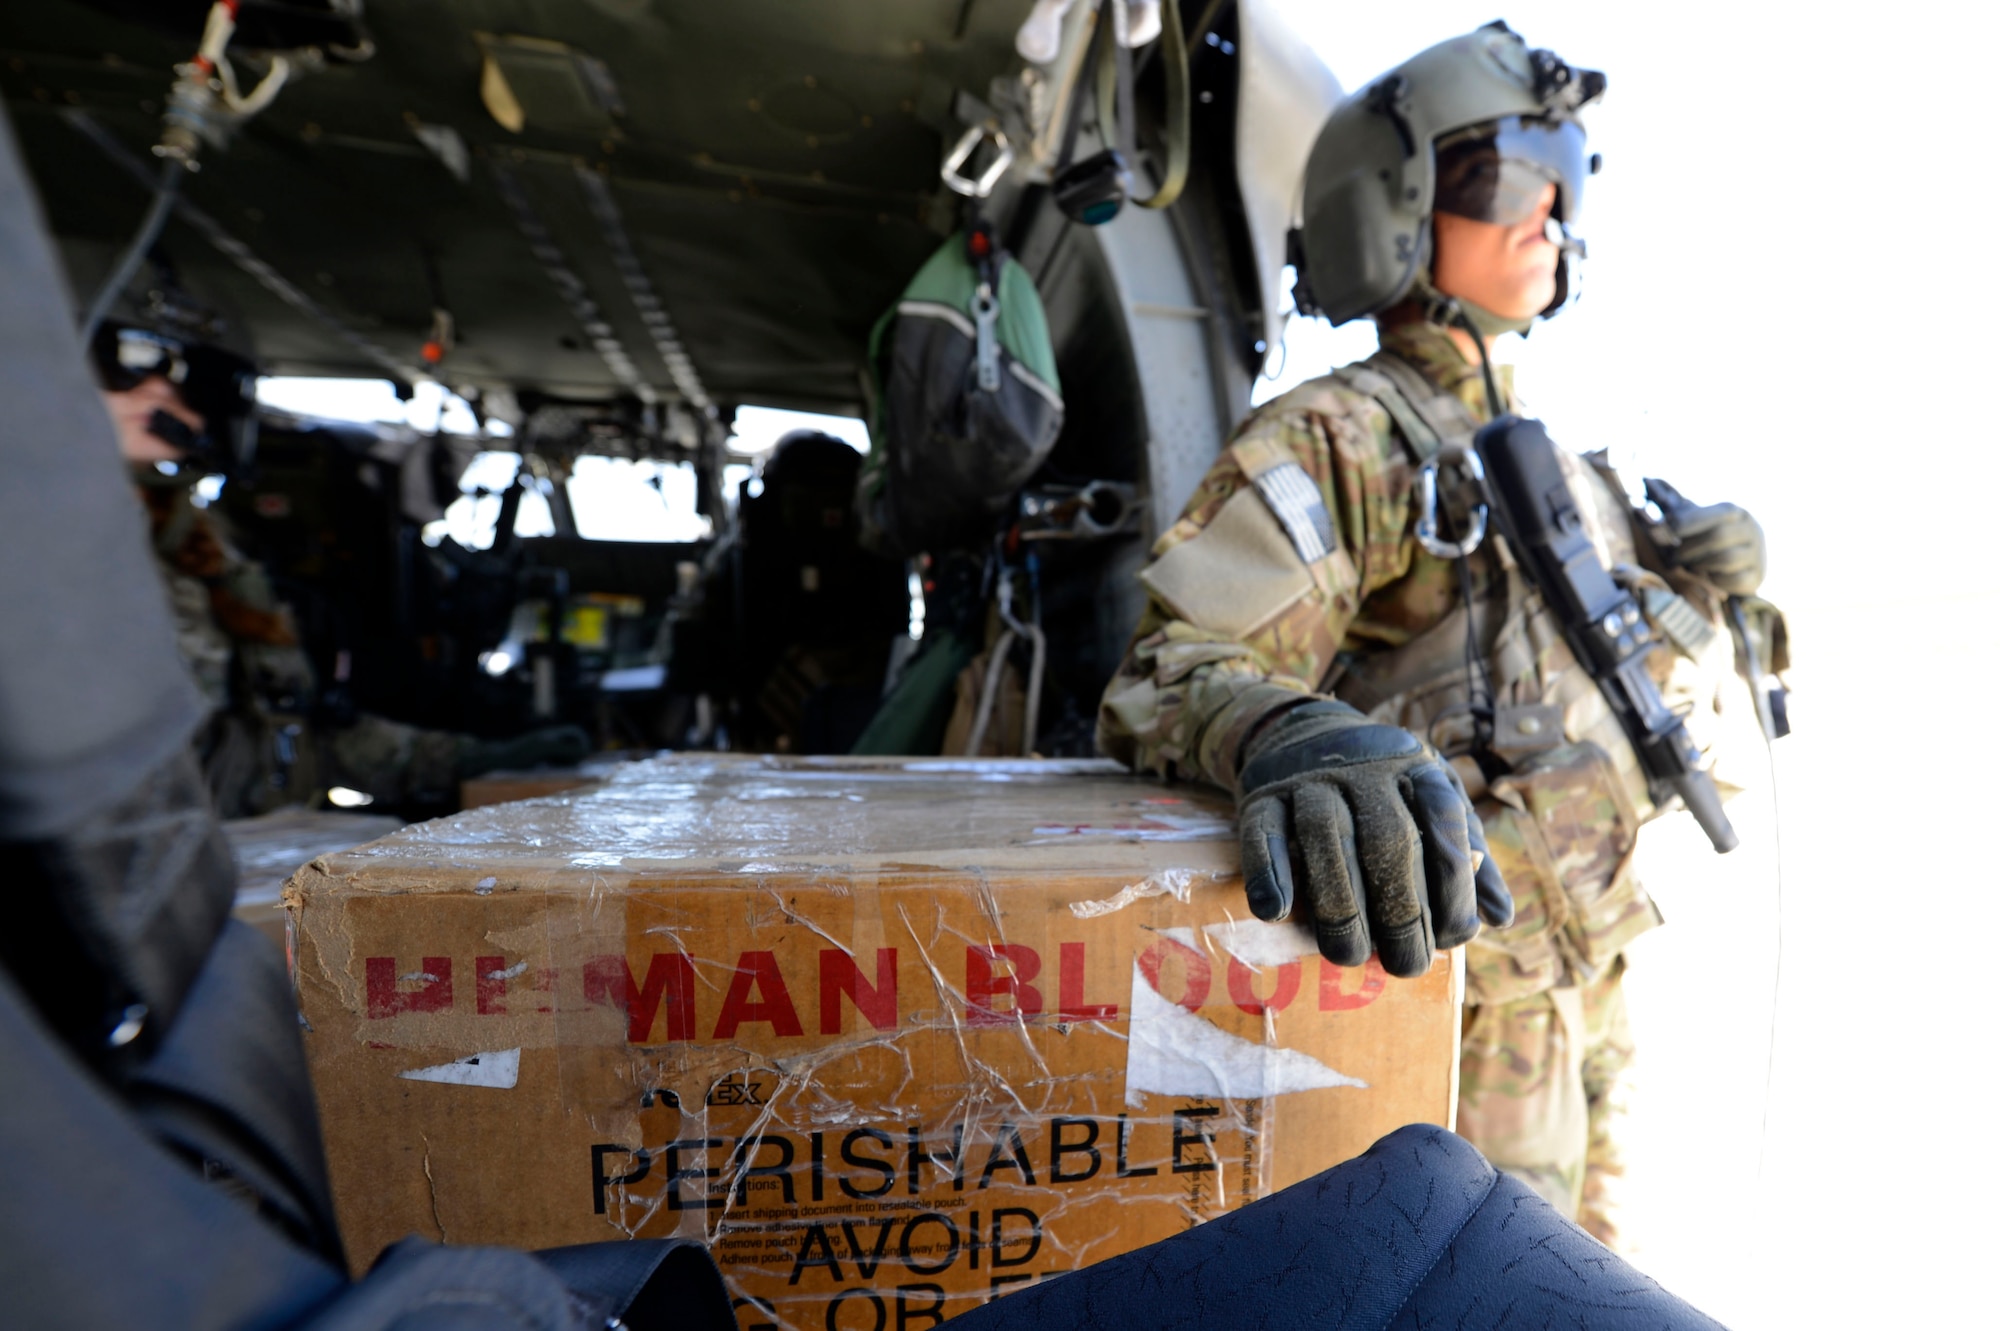 U.S. Army Spc. Robert Moher, 159th Combat Aviation Brigade crew chief, stands by to deliver blood in Afghanistan, July 2014. Moher, a Harlem, N.Y. native, is deployed from Fort Campbell, Ky. Joint Theater Trauma System members ensure fresh blood is always on hand. (U.S. Air Force photo by Senior Airman Sandra Welch)